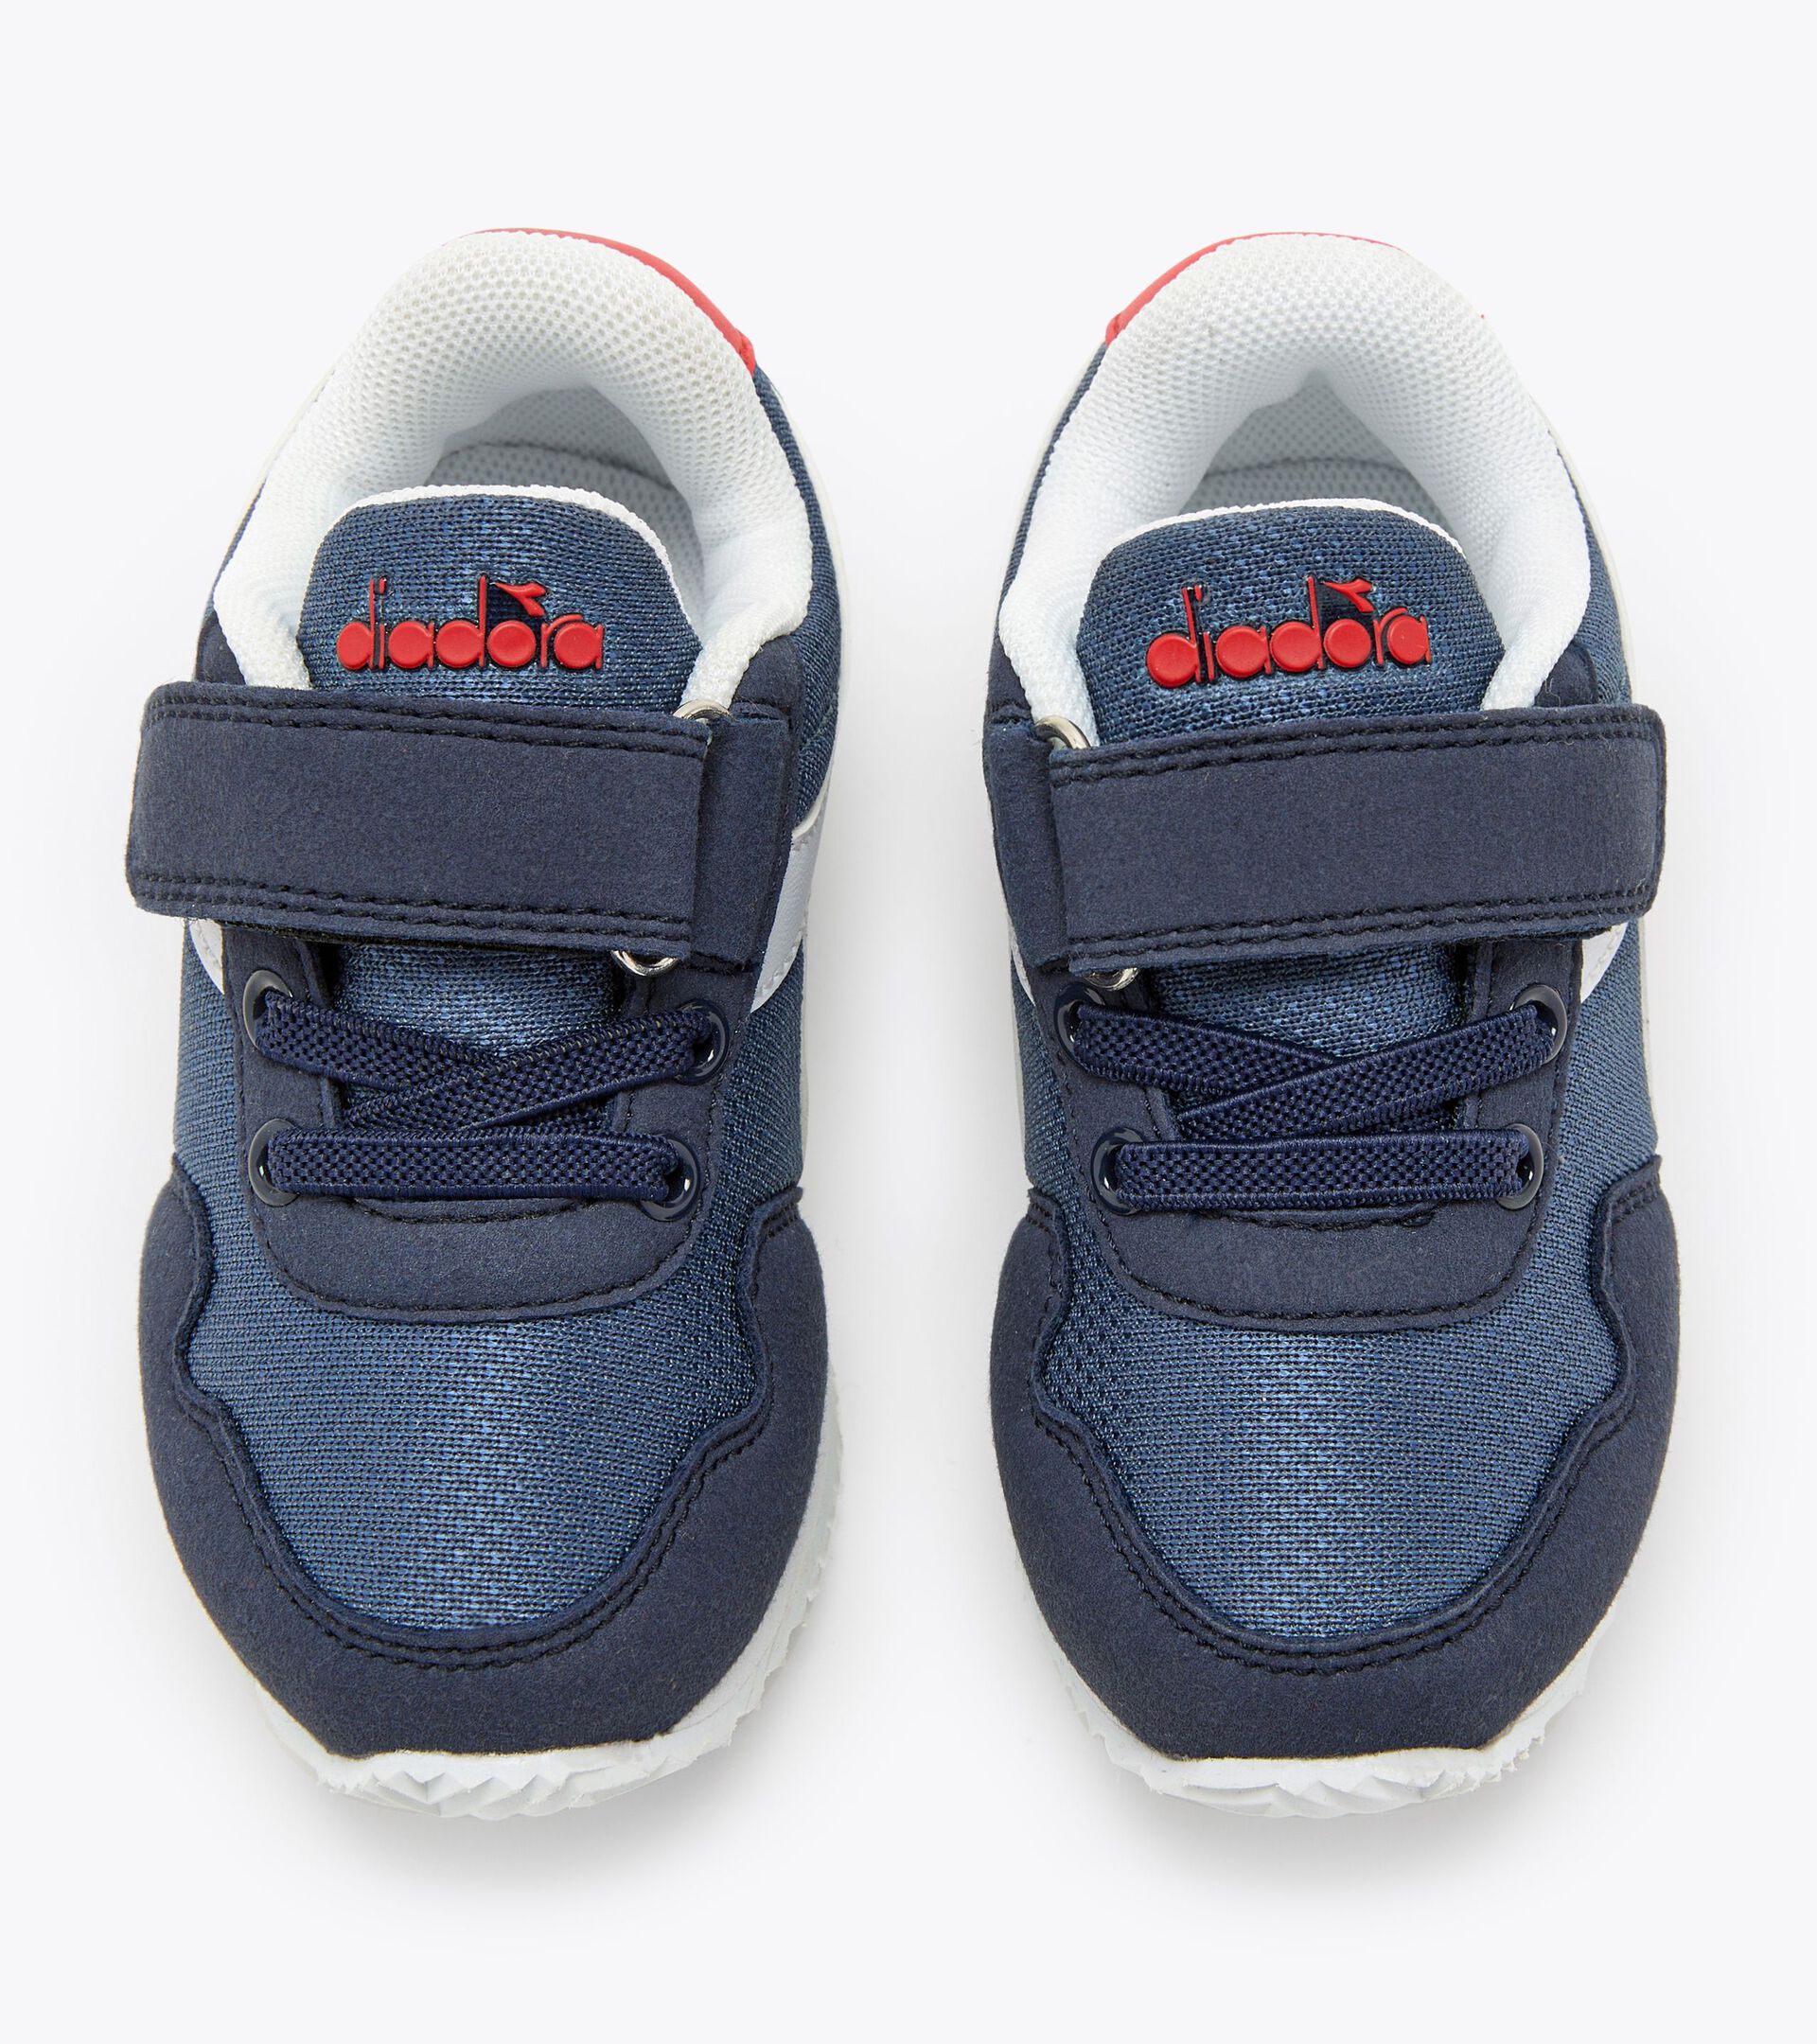 Sports shoes - Toddlers 1-4 years
 SIMPLE RUN TD ENSIGN BLUE - Diadora